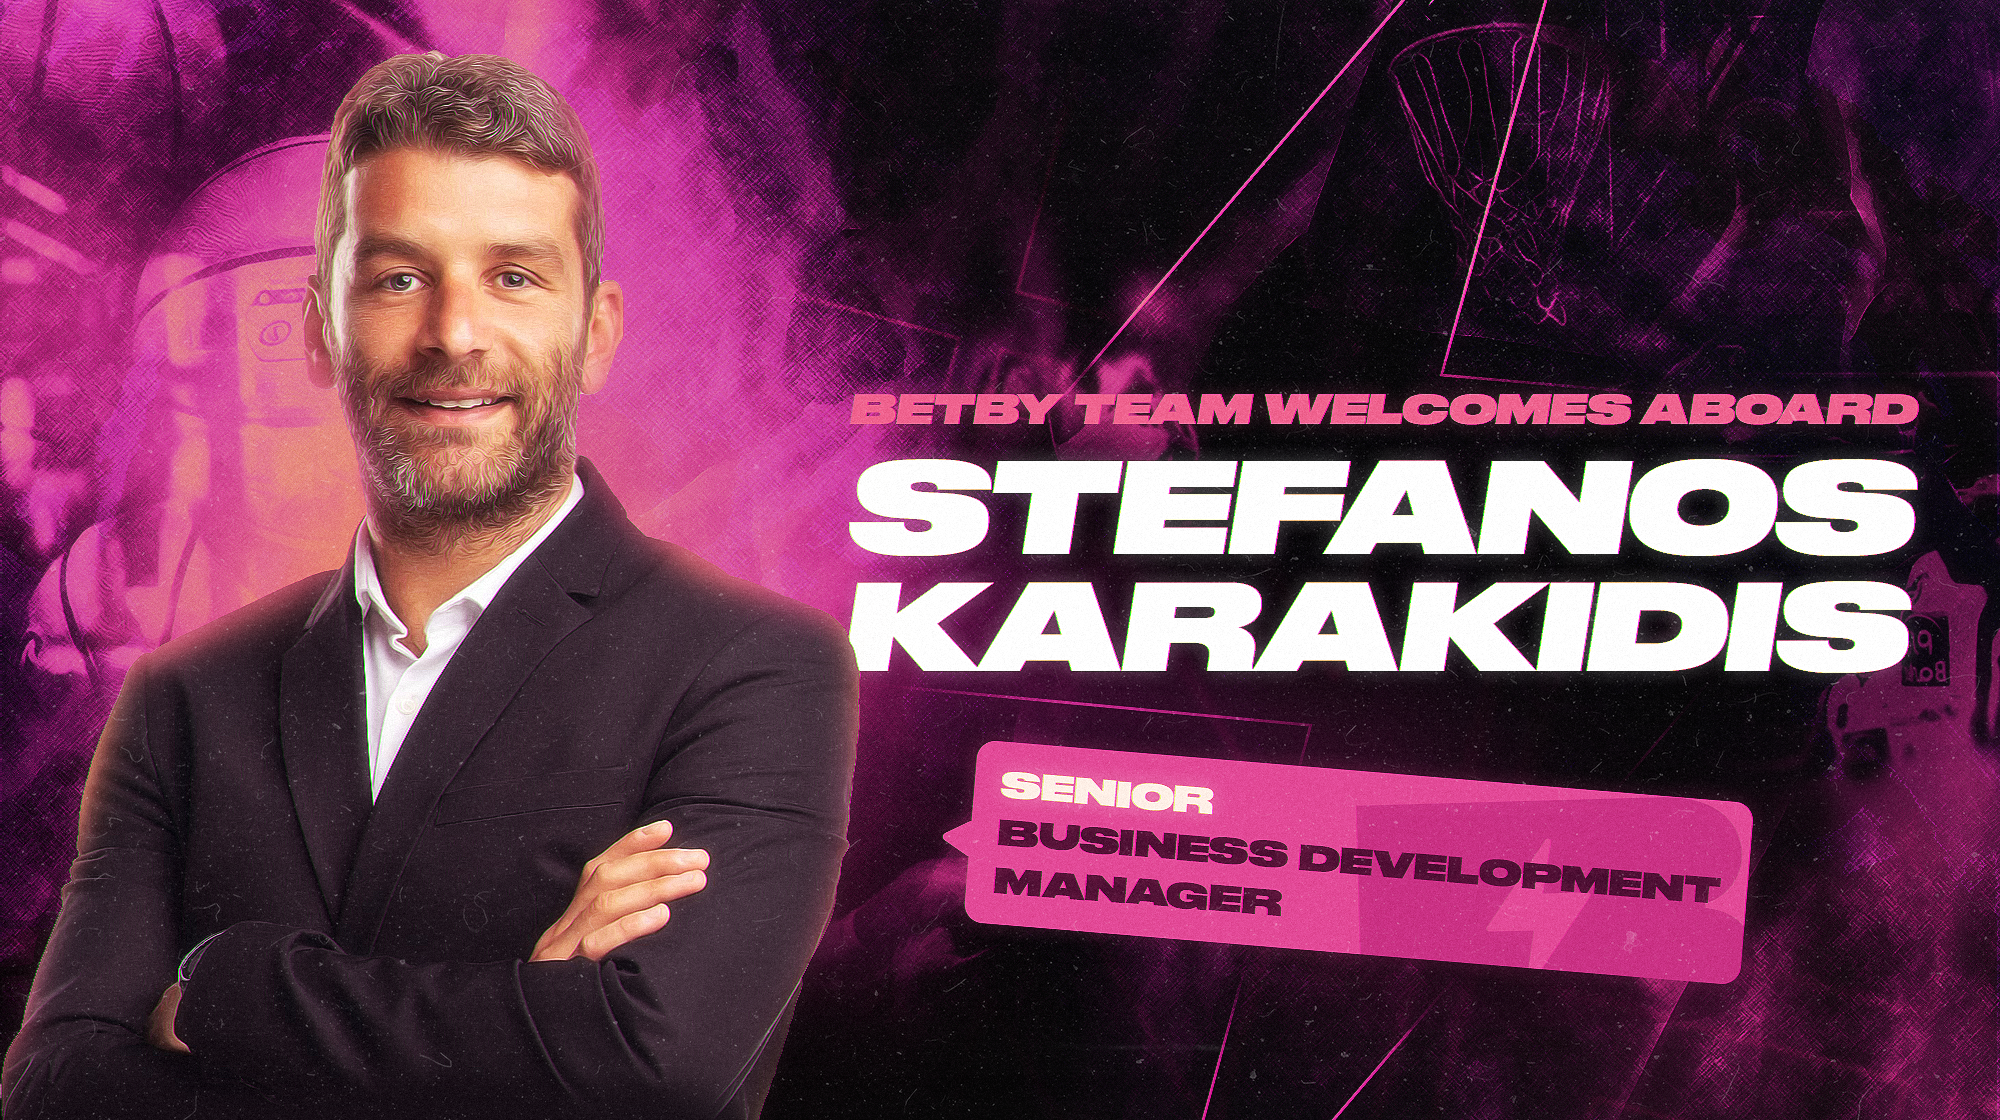 BETBY expands sales team as Stefanos Karakidis is appointed Senior Business Development Manager